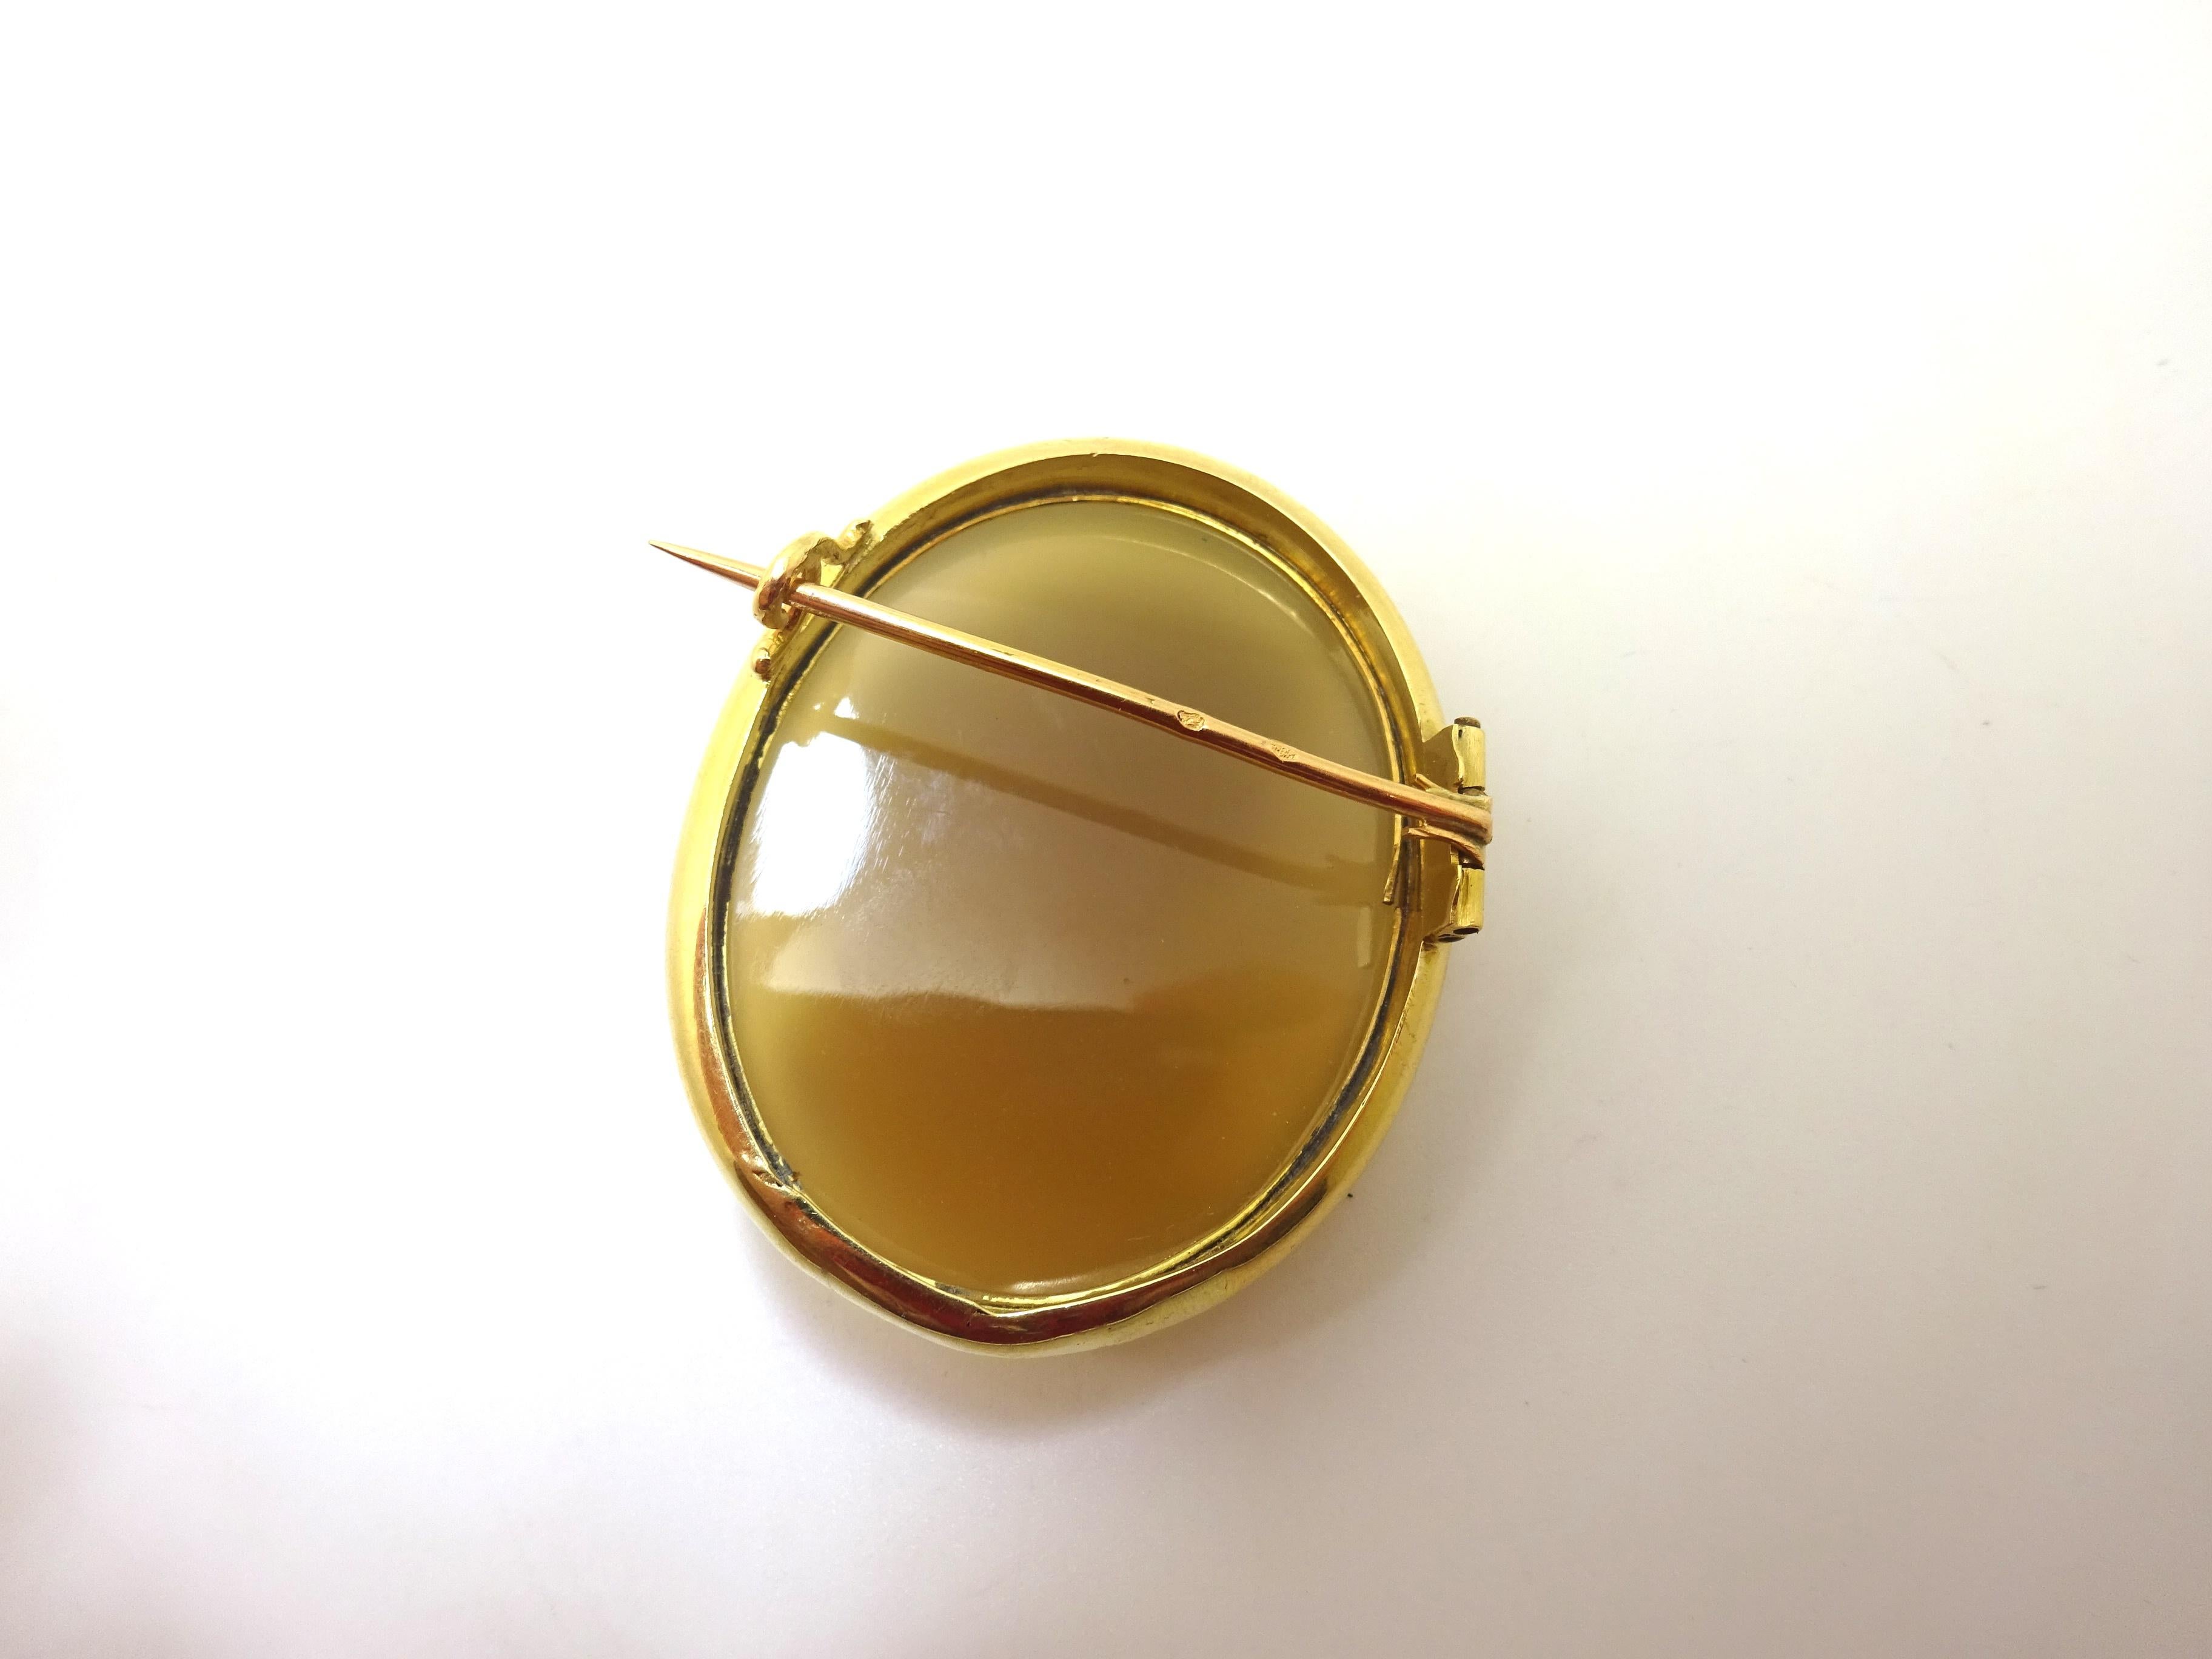 Rare 19th Century 18k yellow gold high relief hard stone cameo pin. The fabulous high relief hand carved banded brown and white agate stone measures 42.4mm x 33.5mm. The pin measures 1 7/8